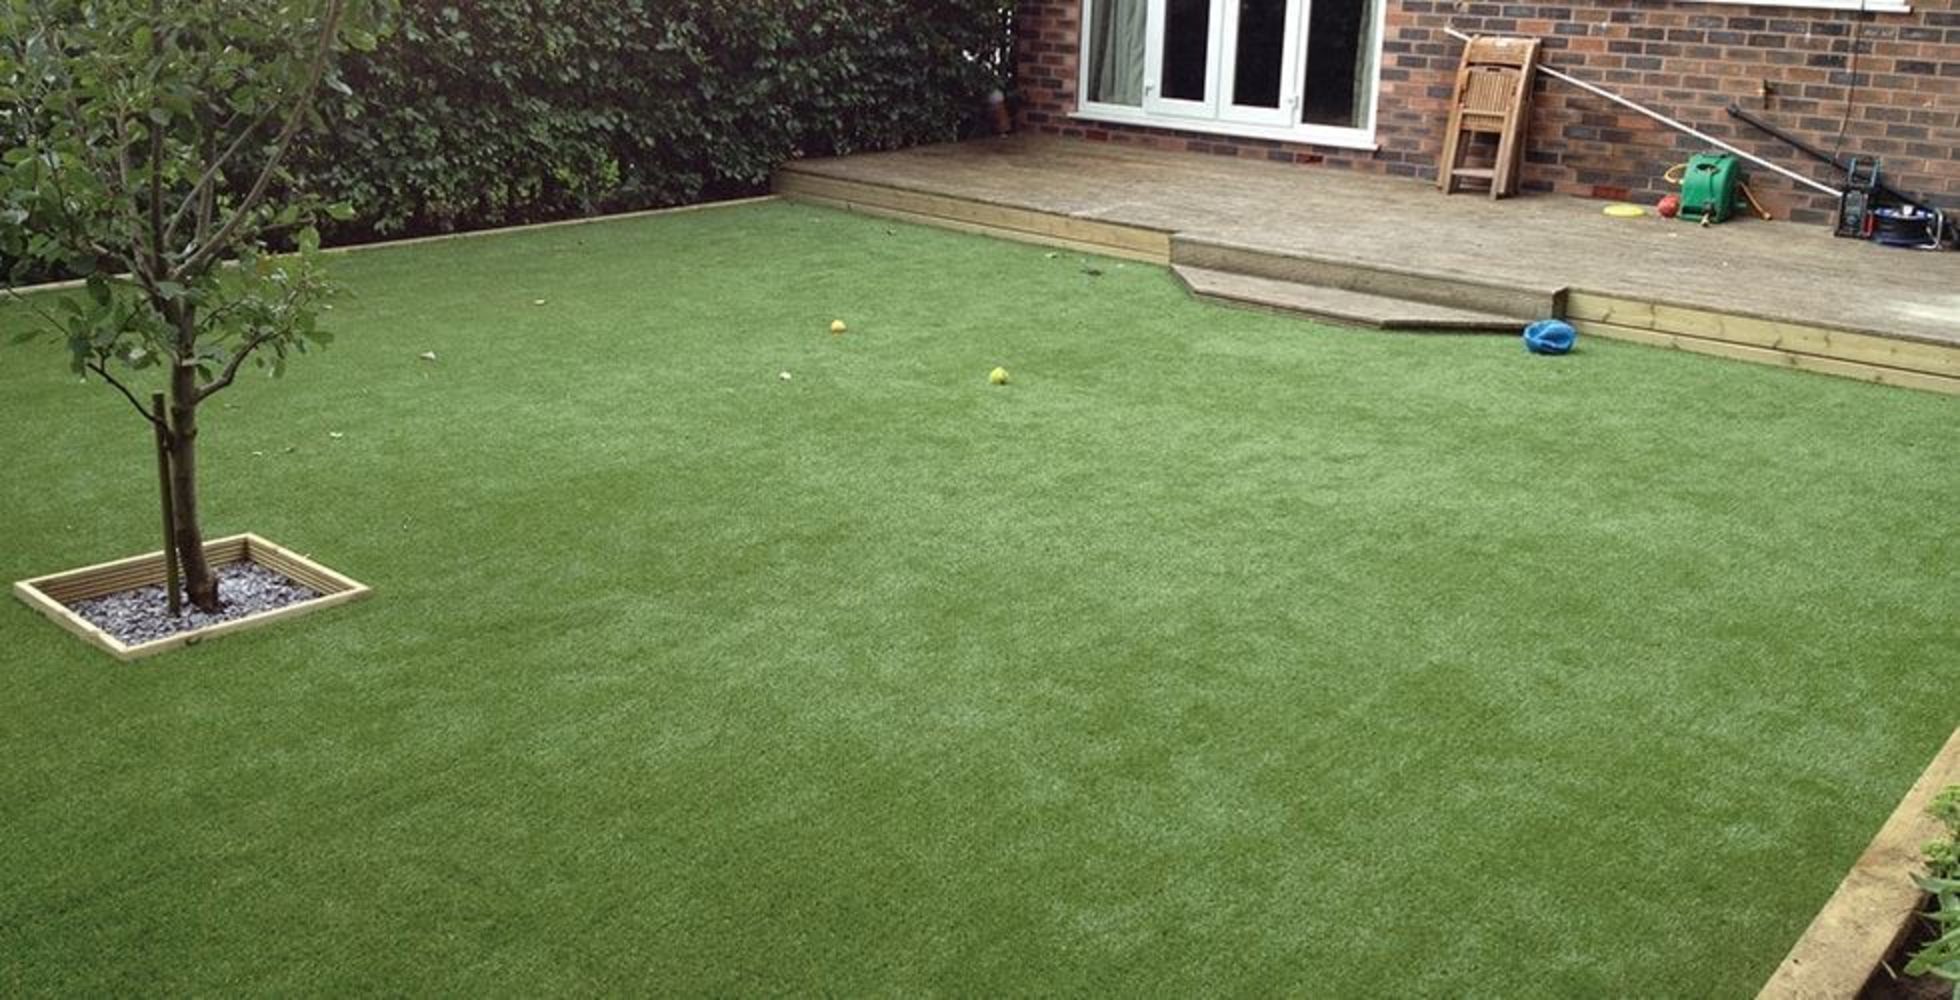 Heavy Duty G5 Astro-Turf manufactured by Playrite | No VAT (on Hammer) | Shipping Available